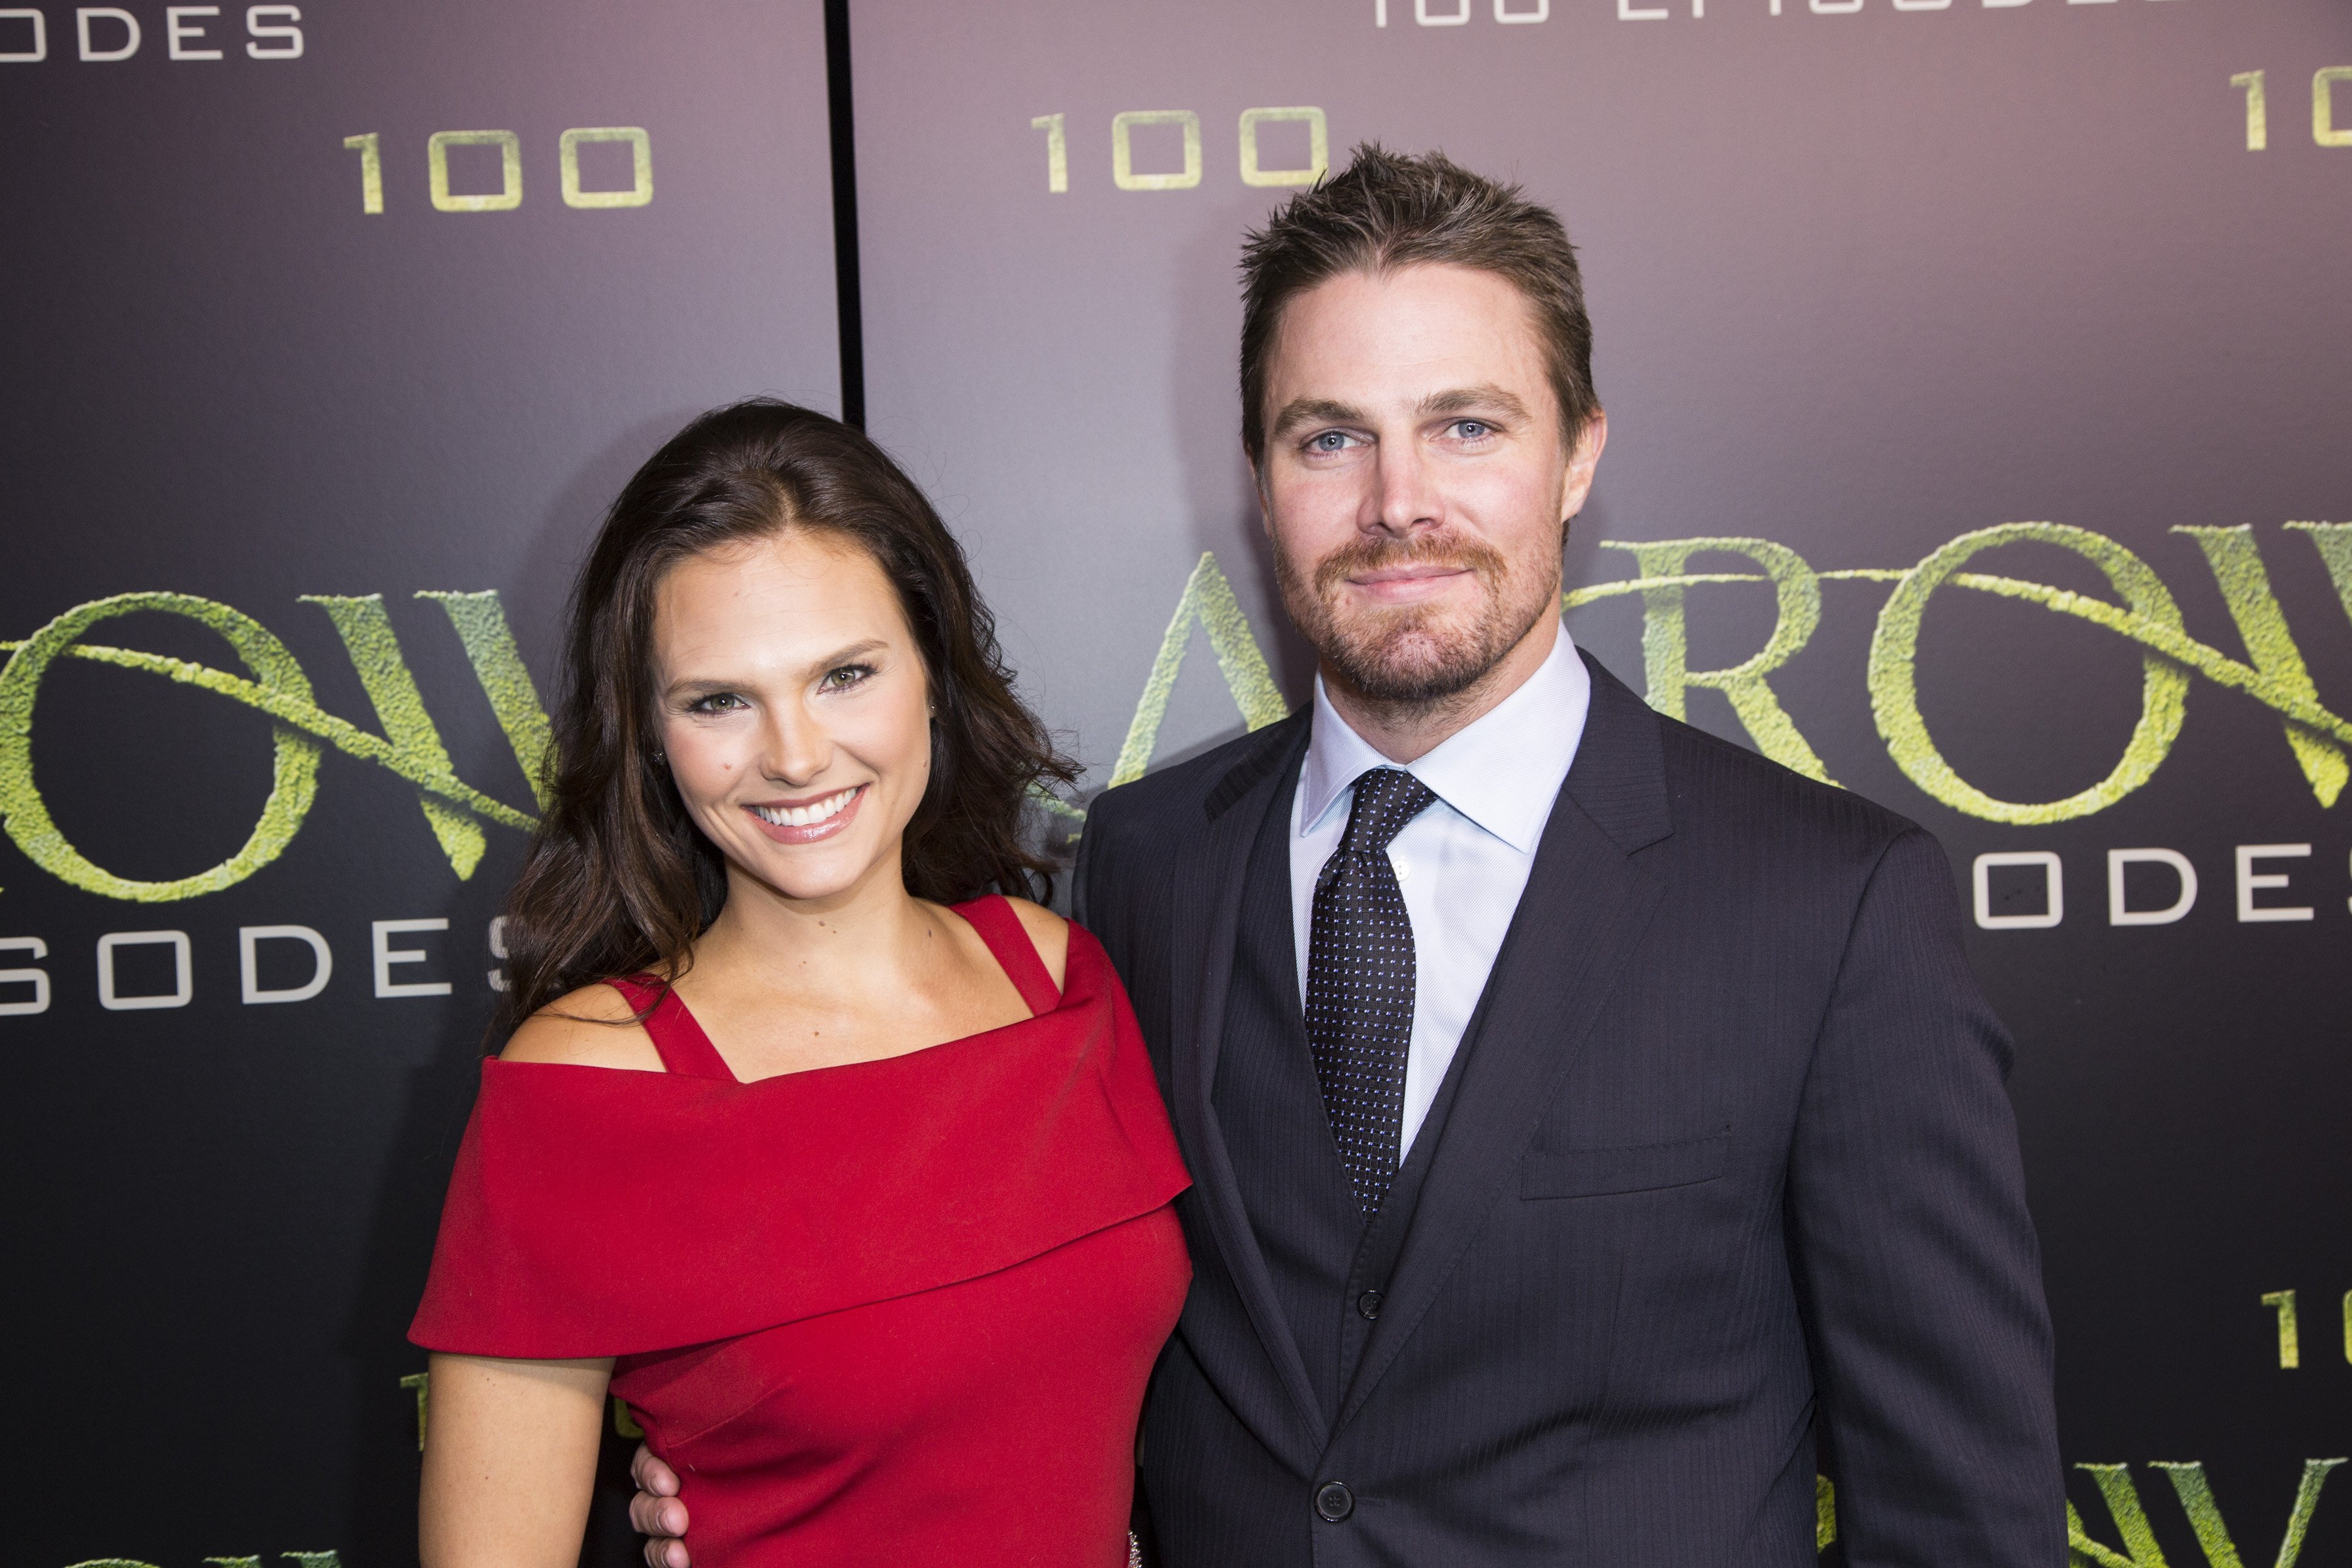 Actors Cassandra Jean and Stephen Amell arrive on the green carpet for the Celebration of the 100th Episode of CW's "Arrow" at the Fairmont Pacific Rim Hotel on Oct 22, 2016 in Vancouver, BC, Canada. | Source: Getty Images